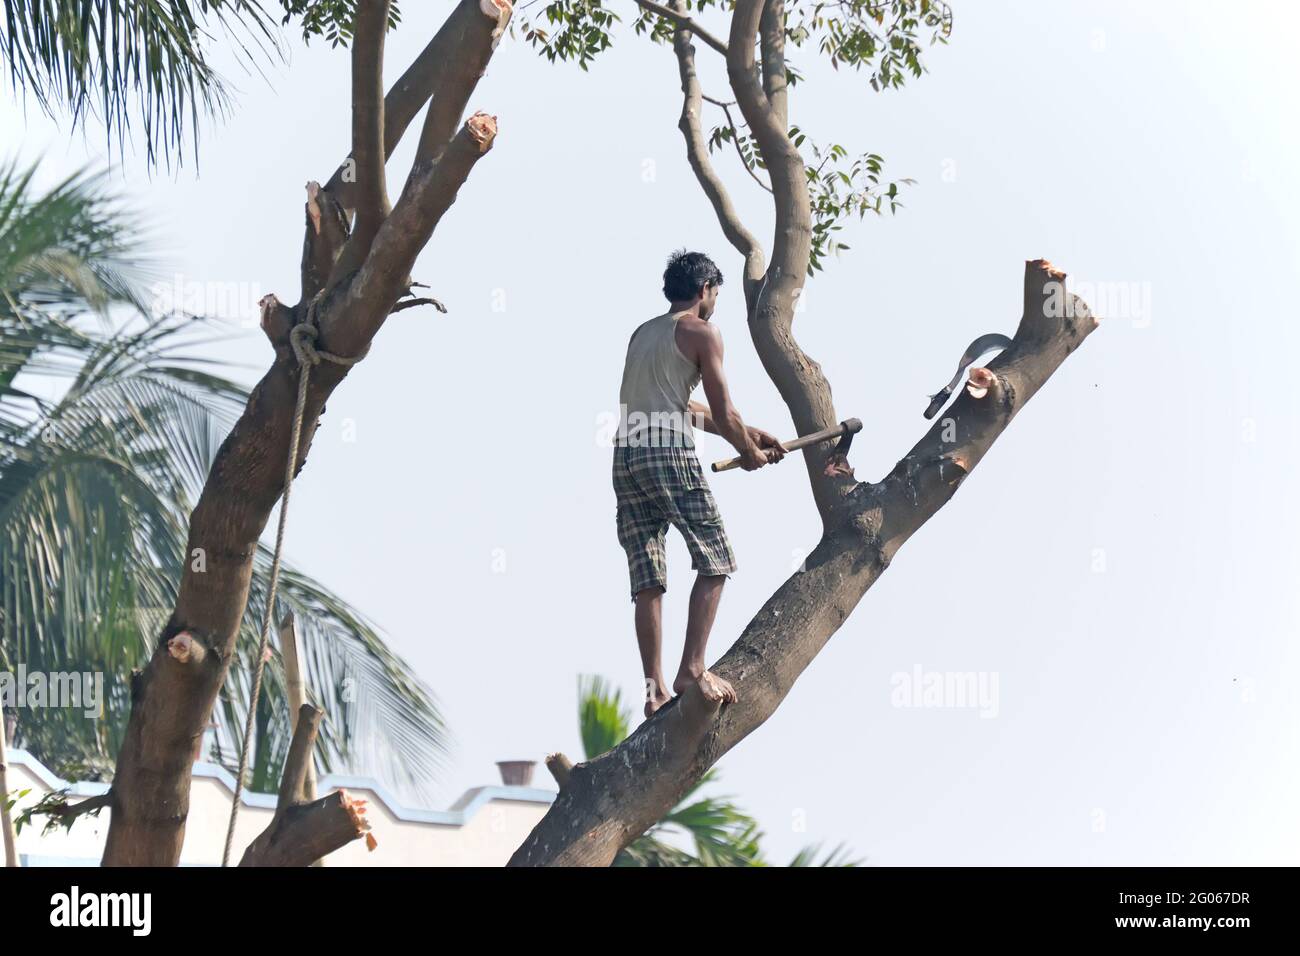 KOLKATA, WEST BENGAL / INDIA - JANUARY 29TH : Unidentified man cutting tree for making space available for urban growth. India is growing economy. Stock Photo